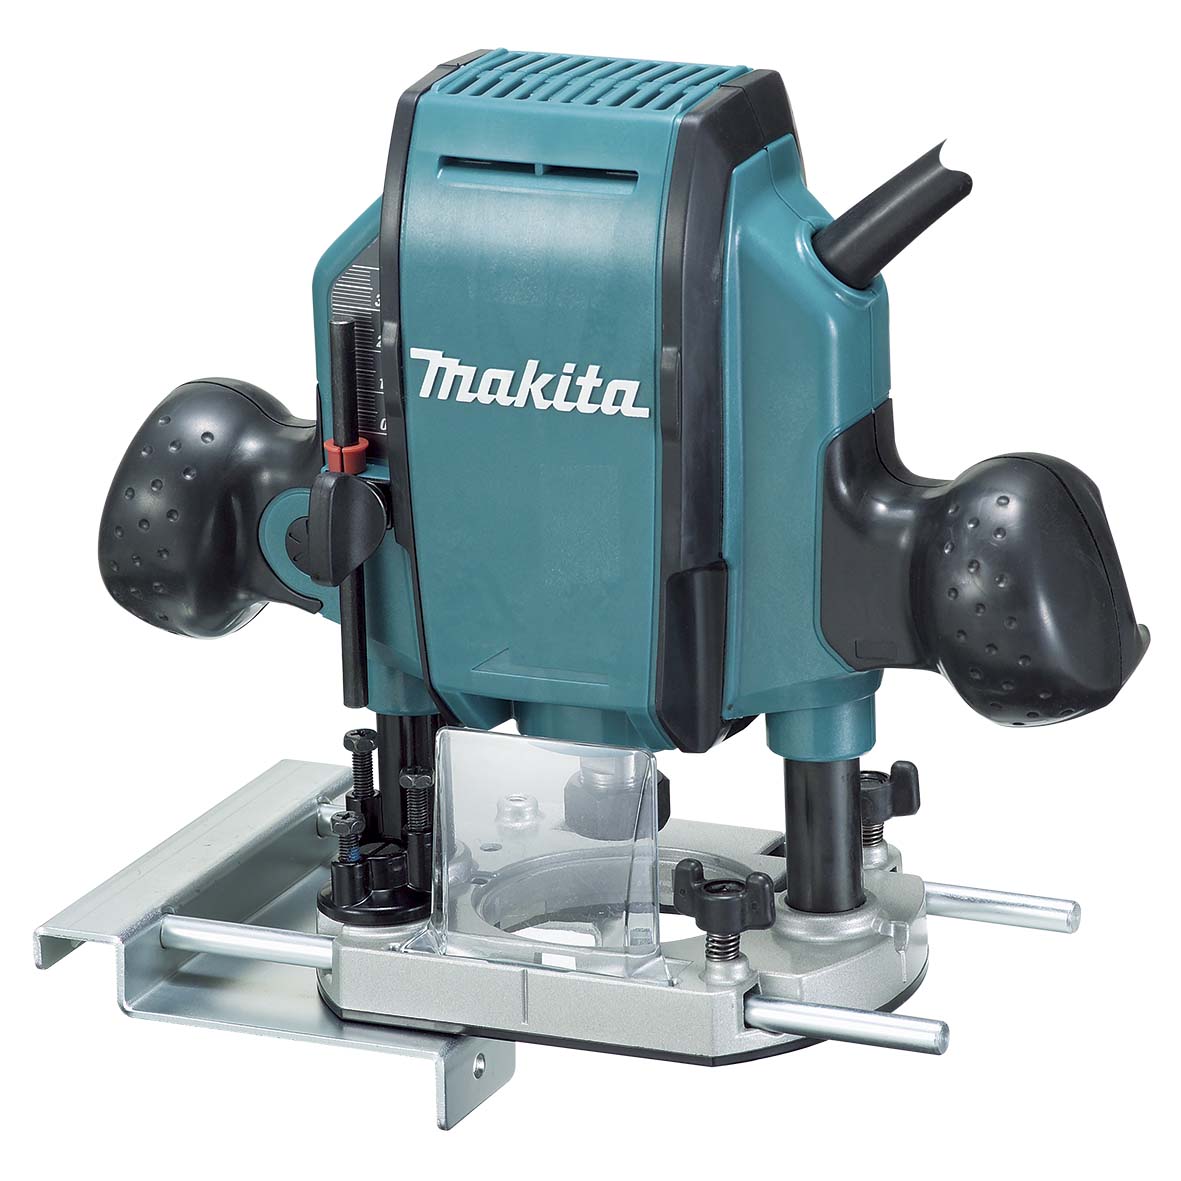 9.5mm (3/8") Plunge Router RP0900X1 by Makita